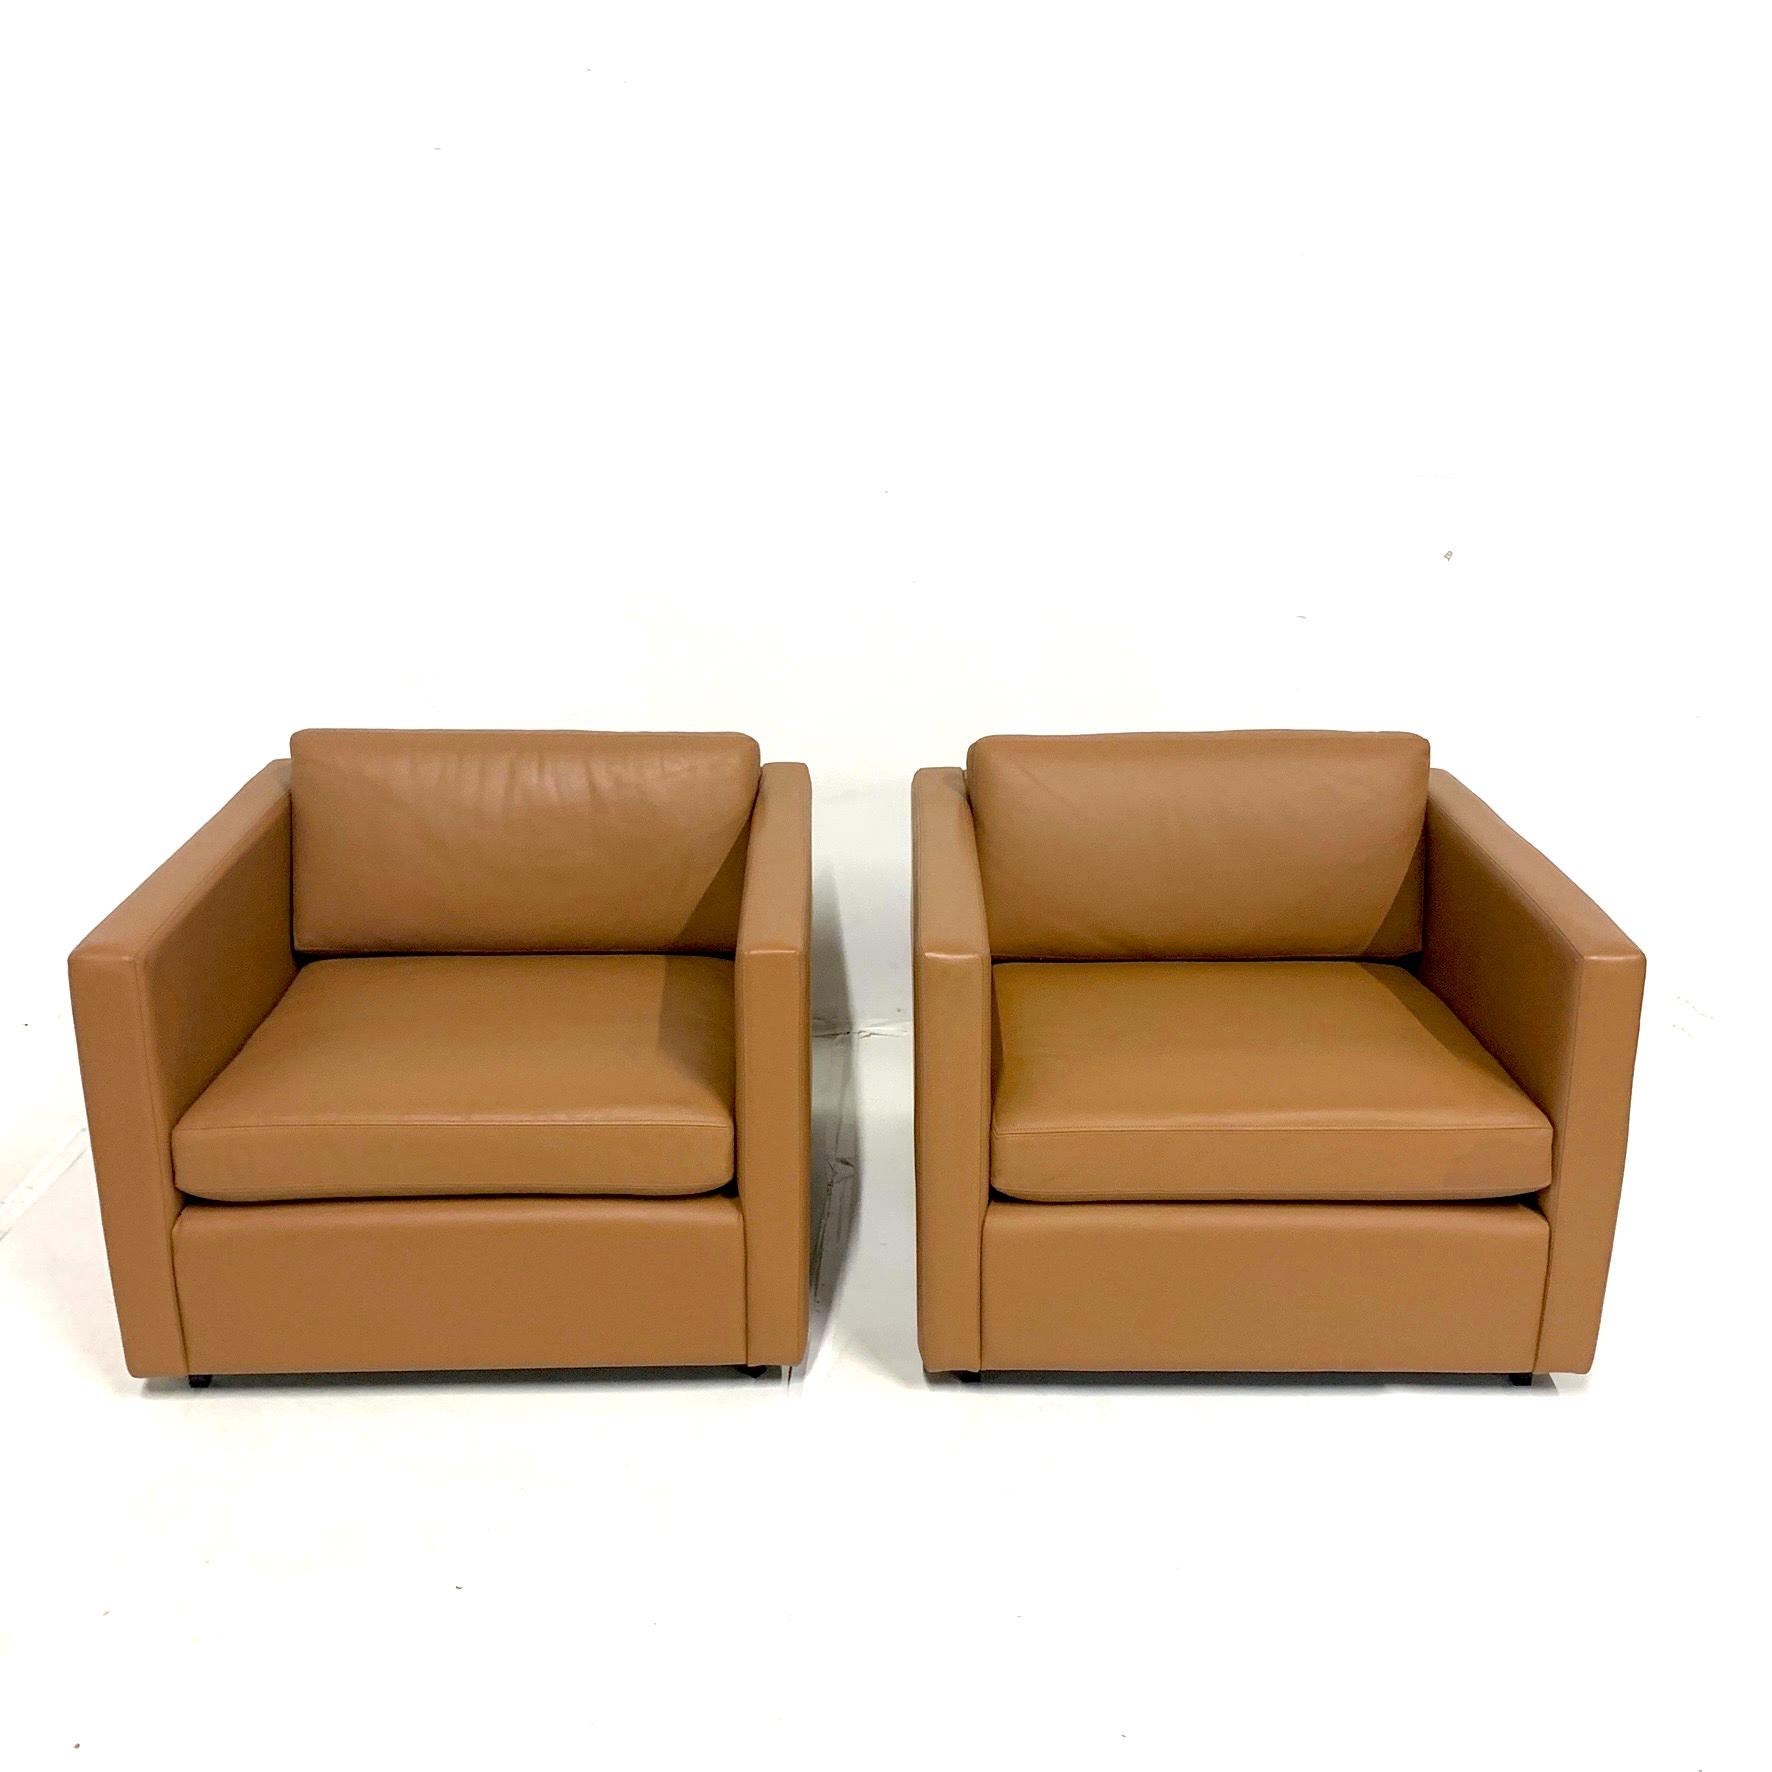 Excellent condition pair of Knoll club chairs in a stunning Carmel colored saddle leather with 2